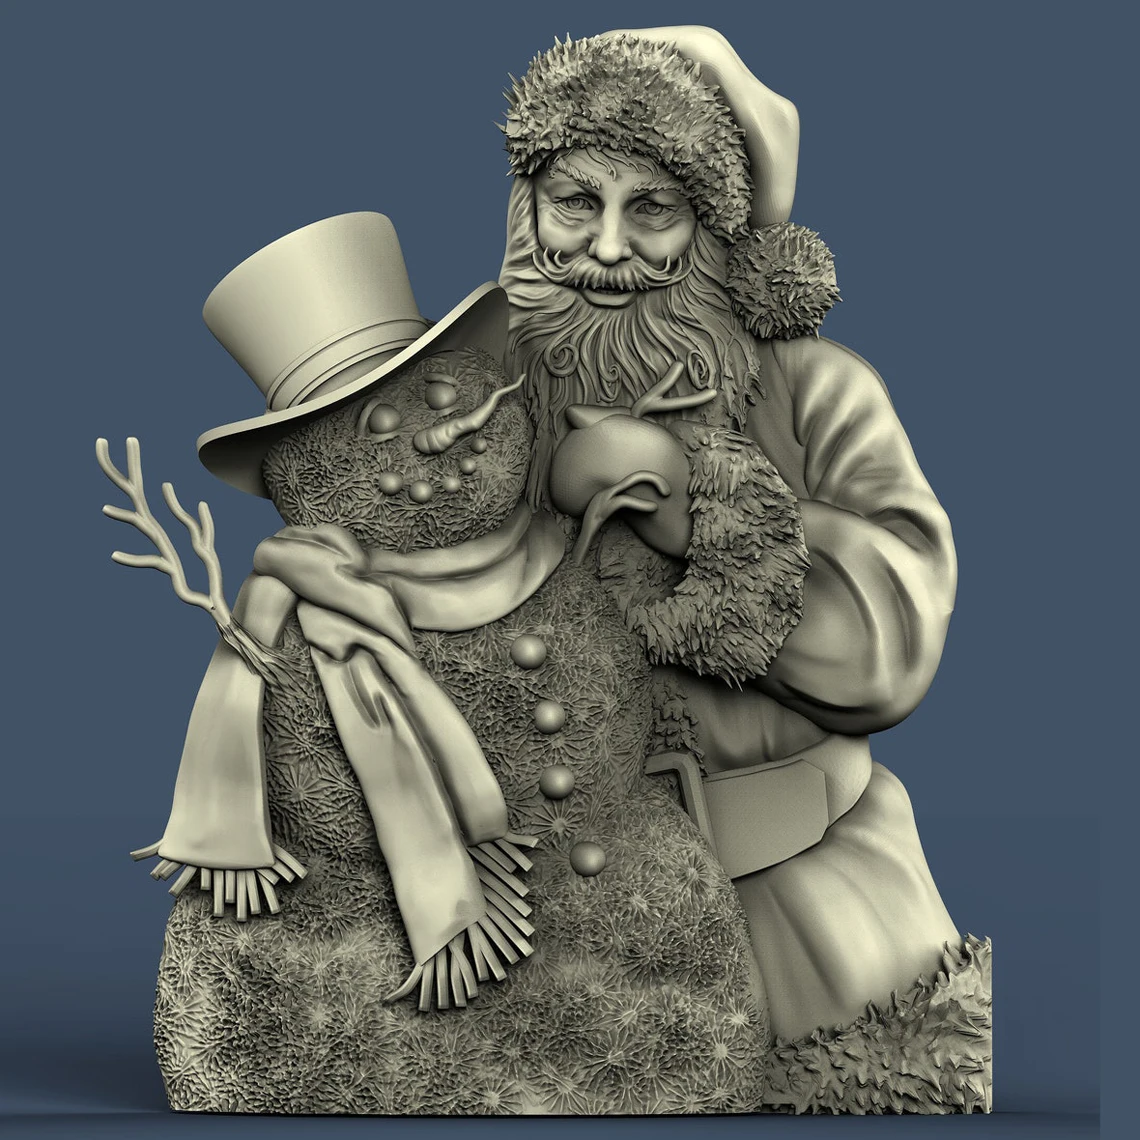 Santa and Snowman Christmas 3D STL Model for CNC Router Engraving & 3D Printing Relief Support ZBrush Artcam Aspire Cut3D cnc wood router